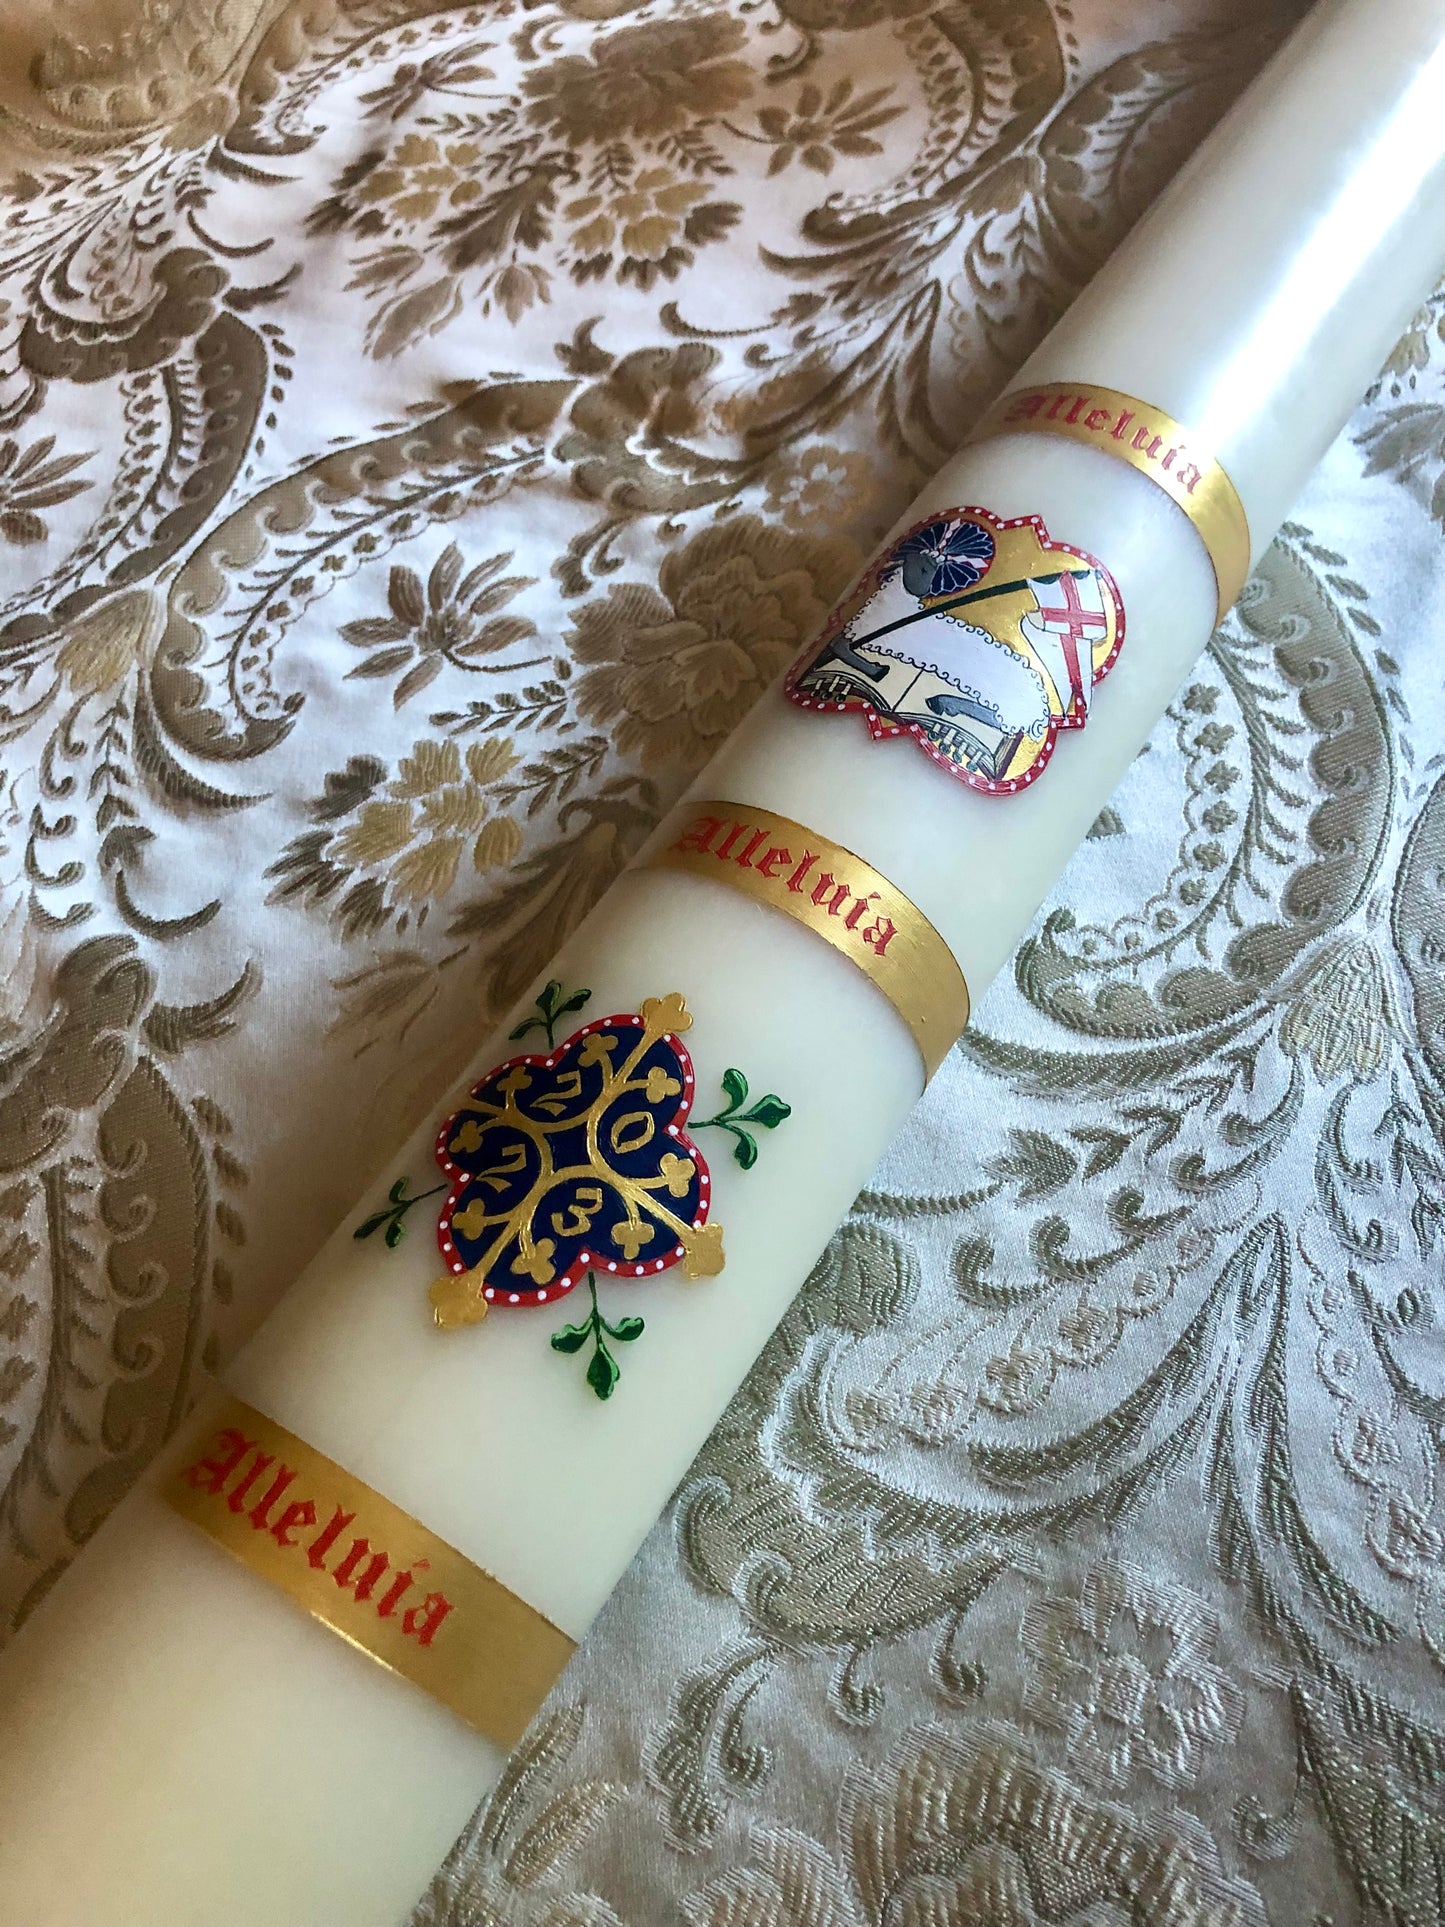 Alleluia Paschal Candle